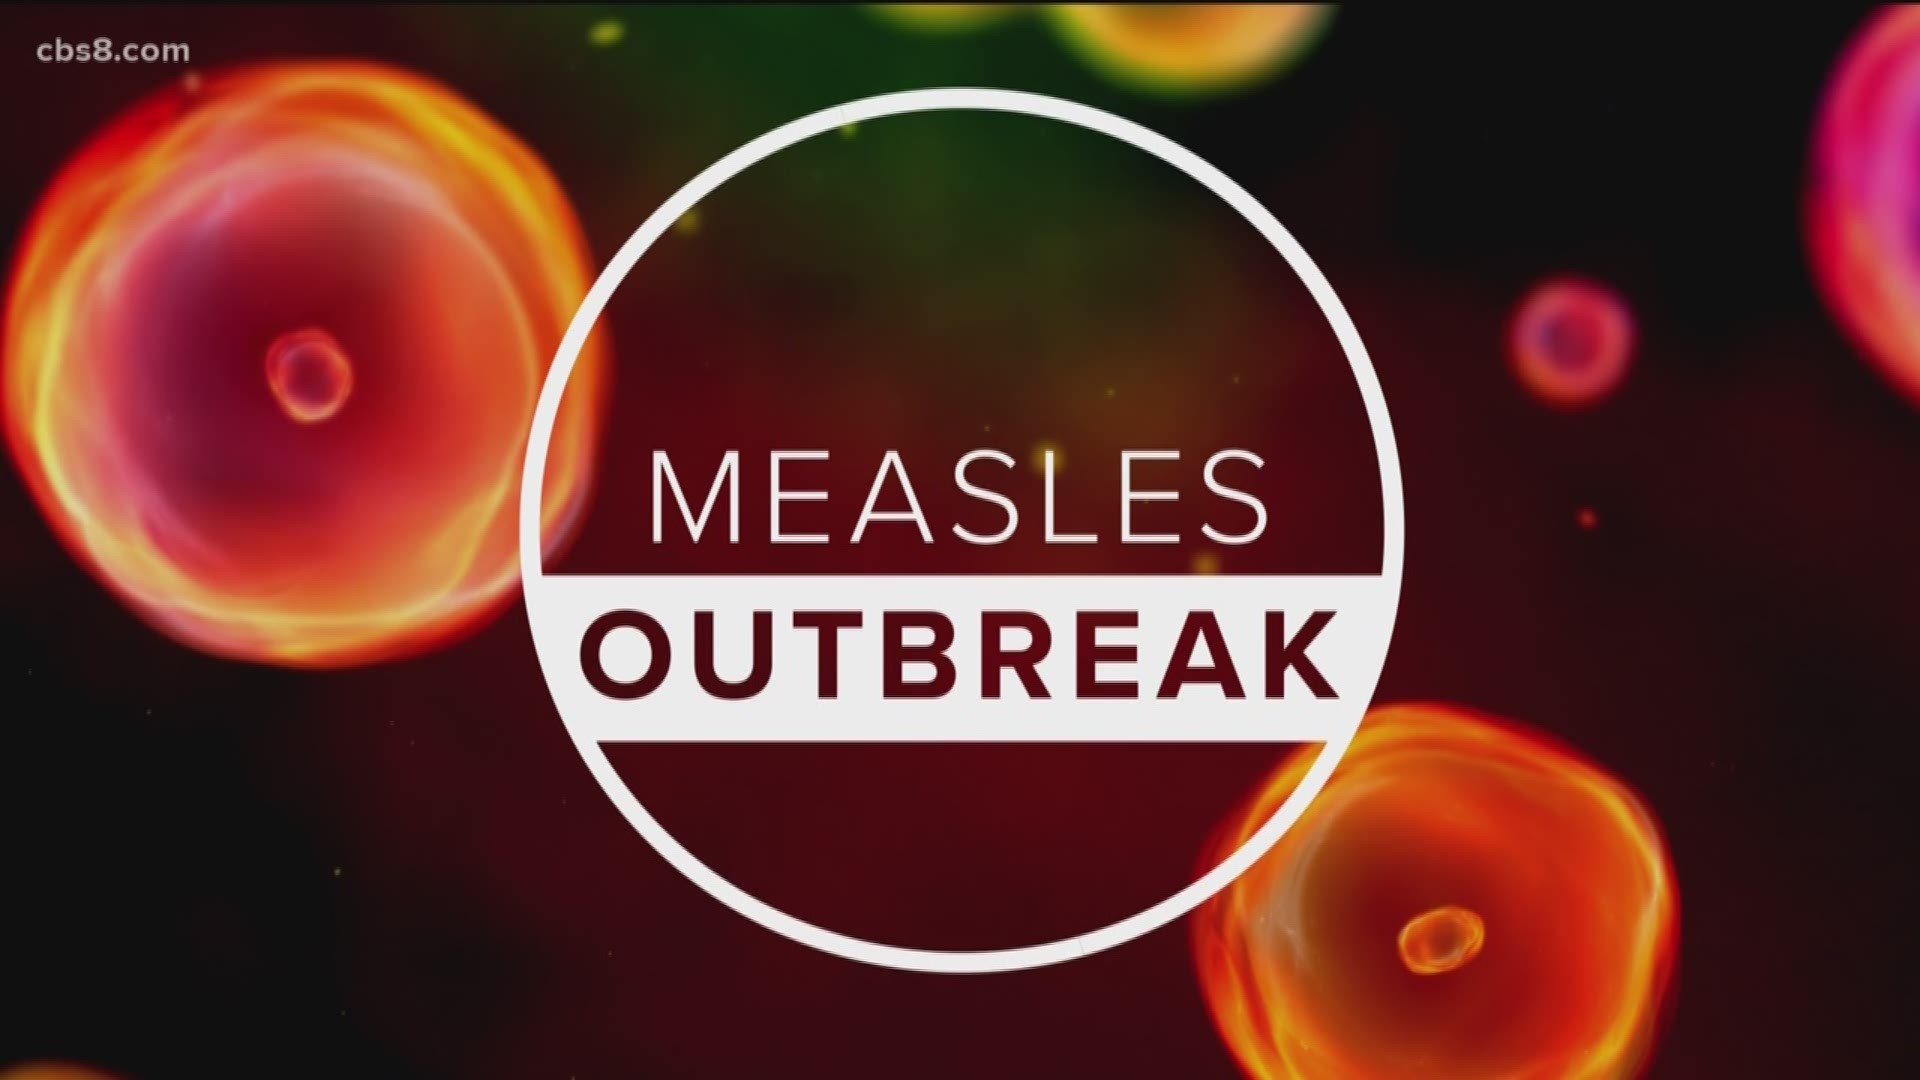 As of March 20, there are no reported cases of measles in Iowa. However, neighboring Minnesota, Missouri and Illinois all have reported cases.